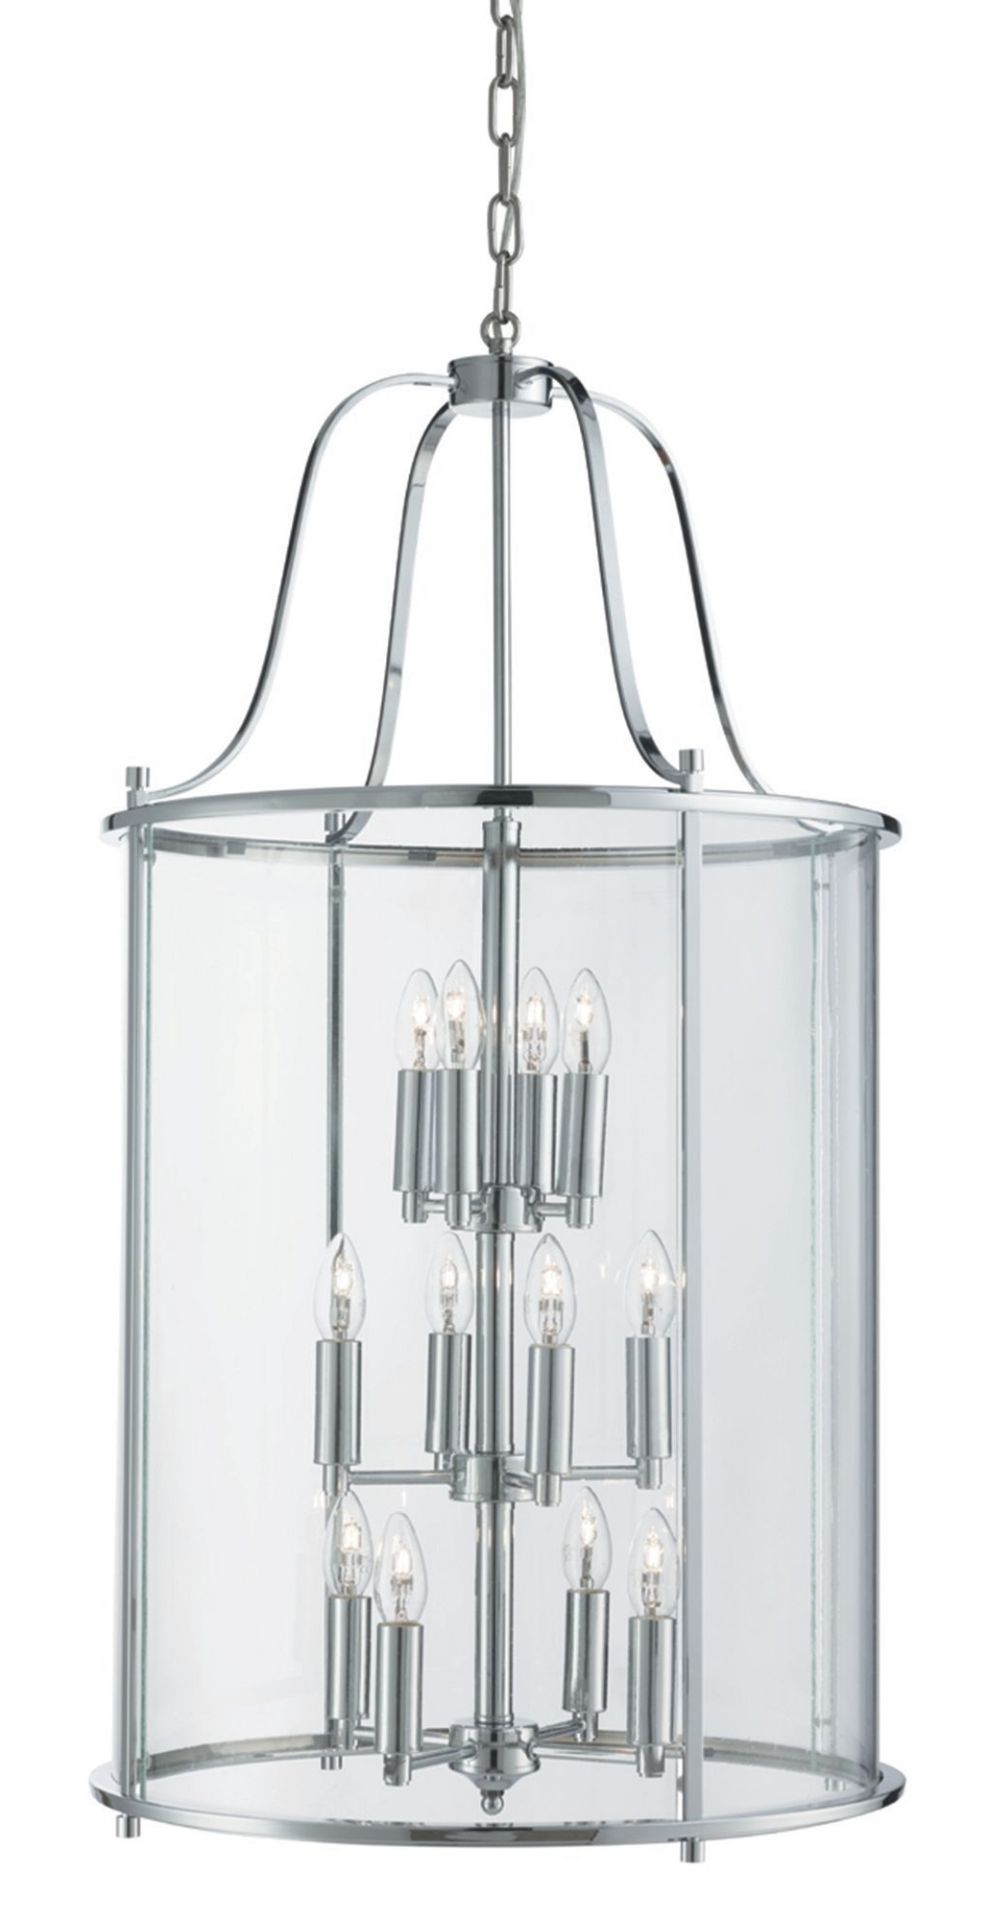 1 x Victorian Lantern 12 Light Ceiling Pendant Polished Chrome - New Boxed Stock - CL323 - Ref: WH1 - Image 3 of 3